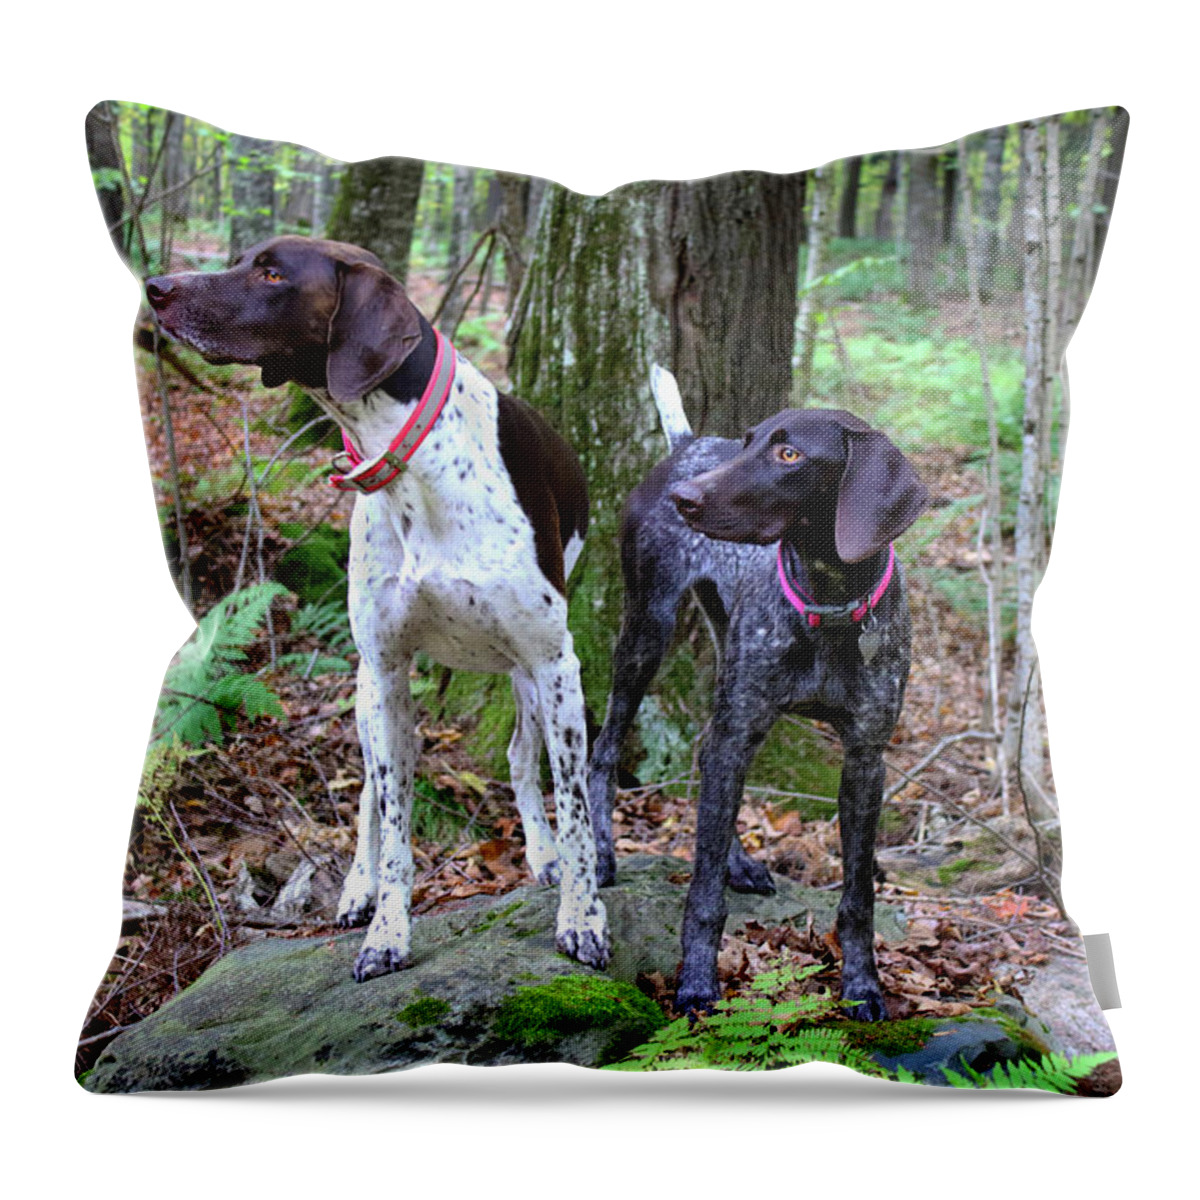  Throw Pillow featuring the photograph My Girls by Brook Burling